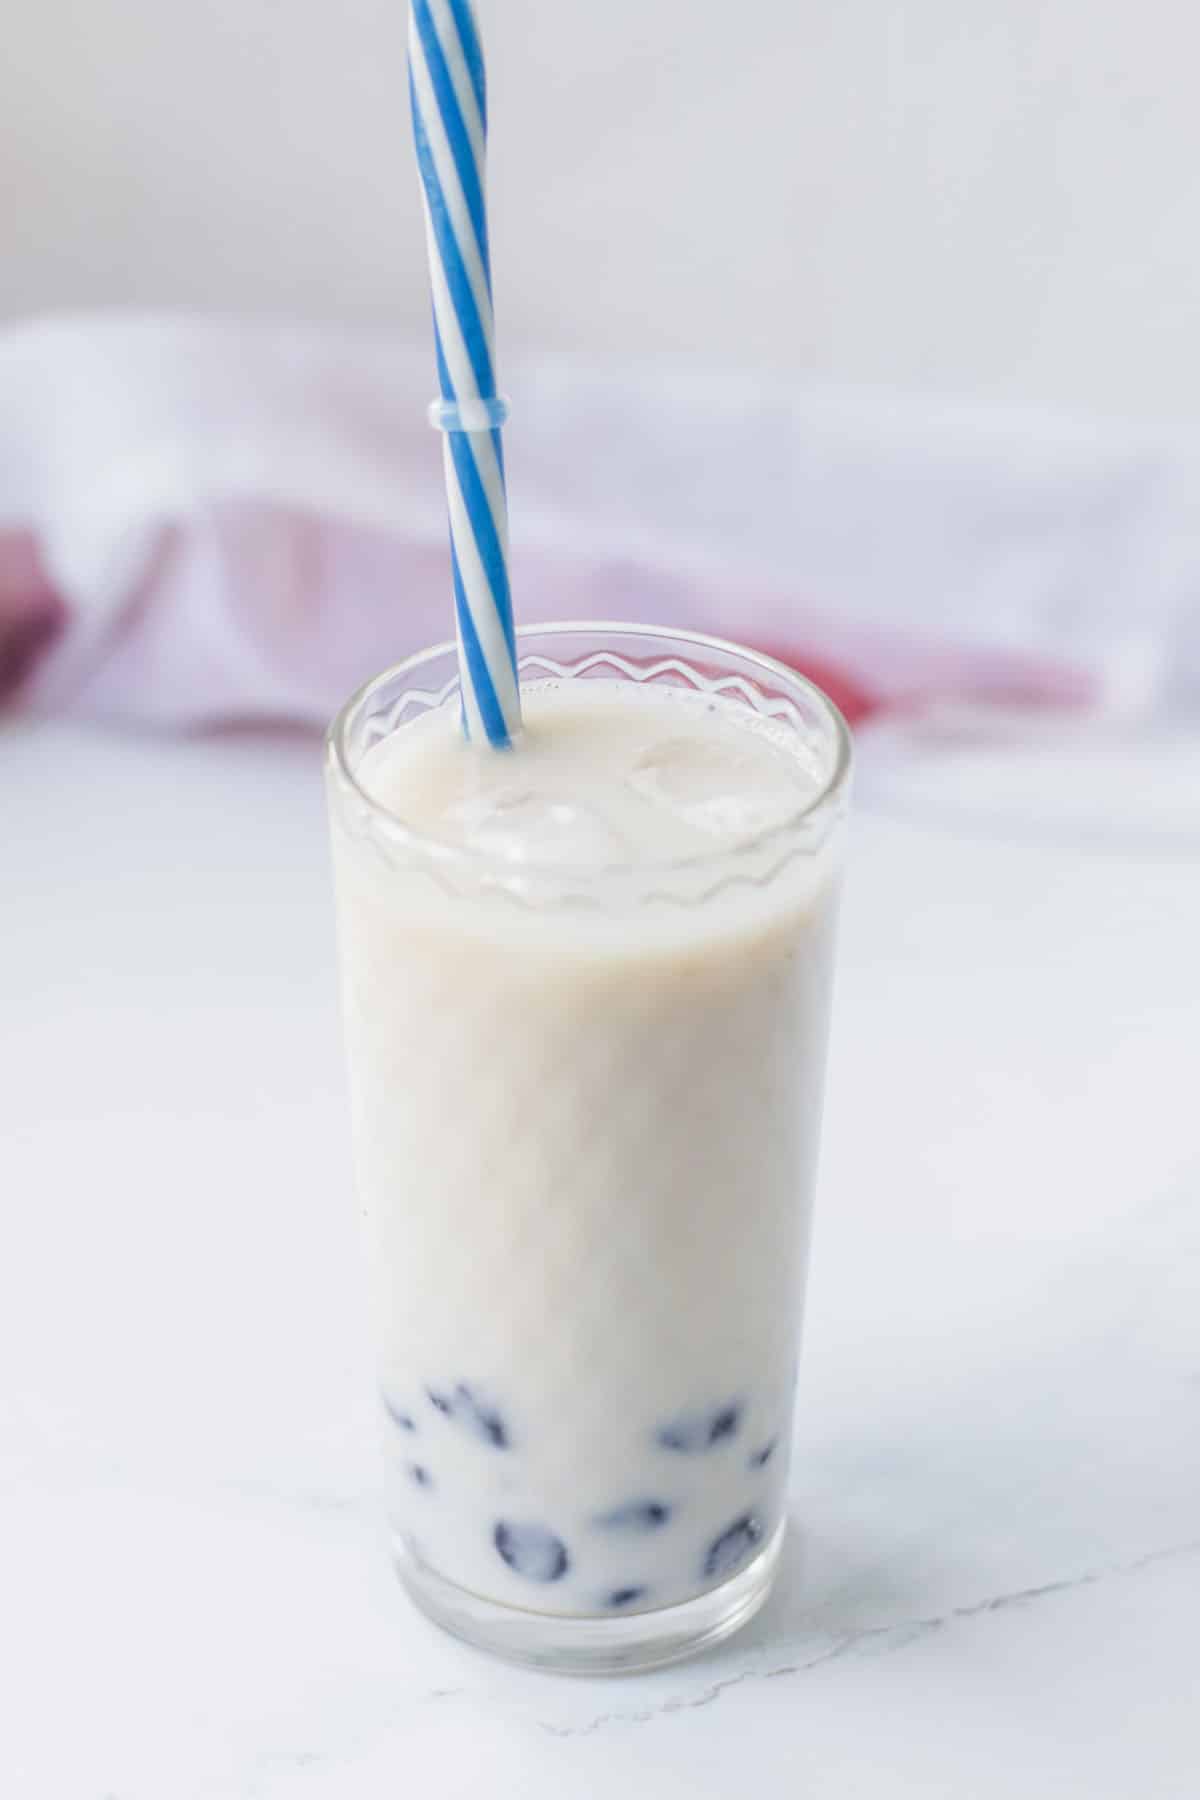 Bubble tea in a glass with a blue straw.